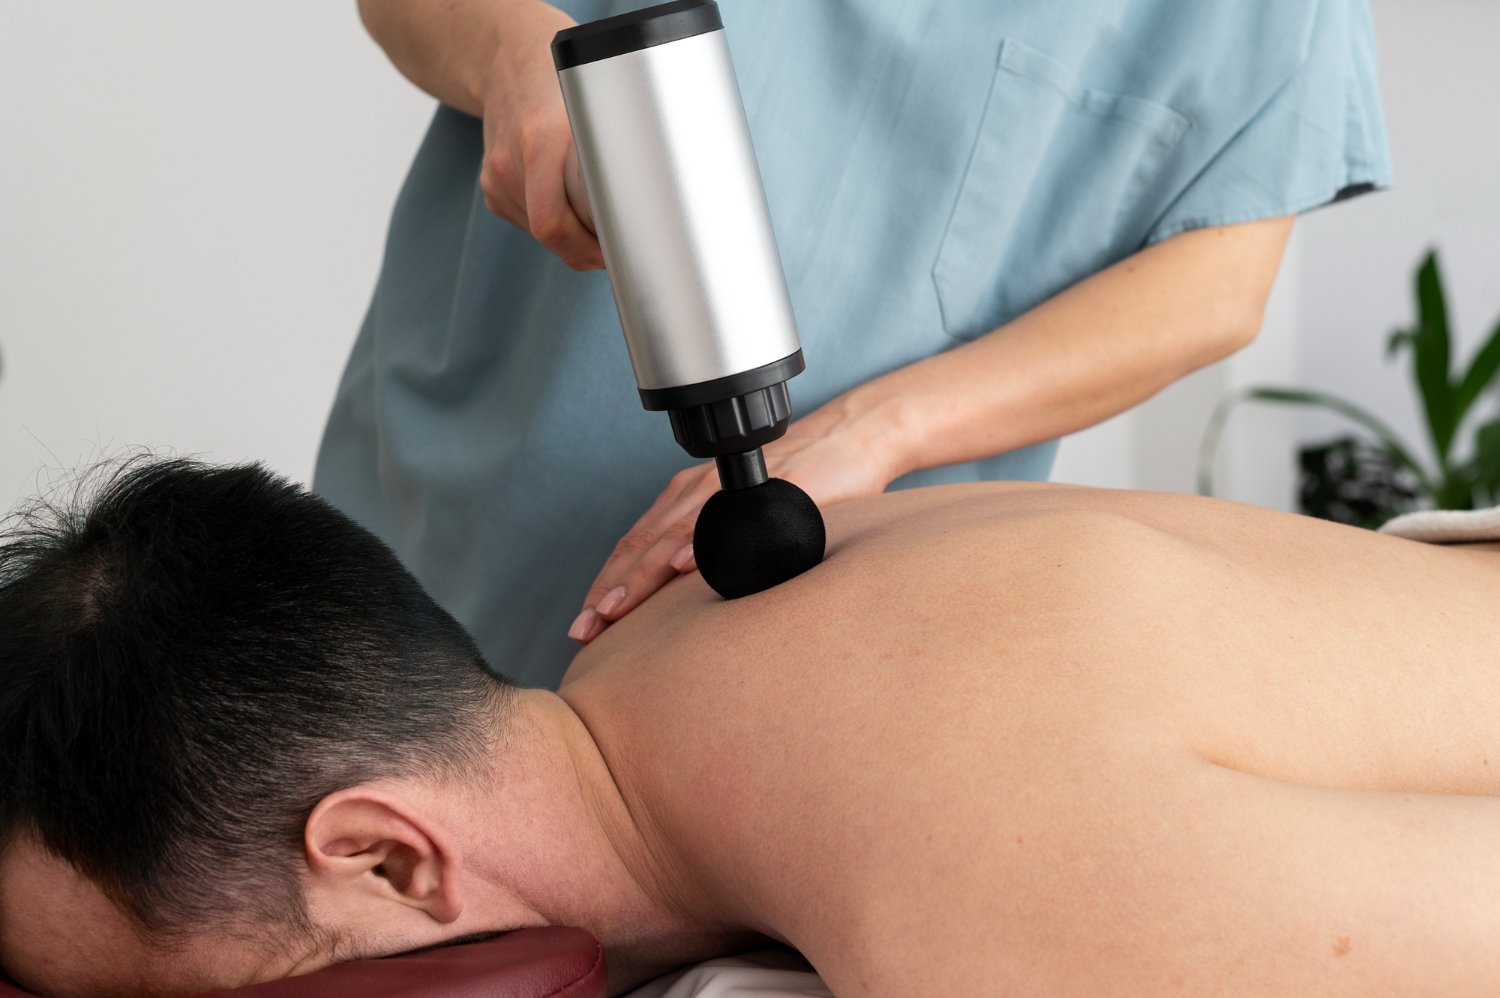 Shockwave treatments in Thailand